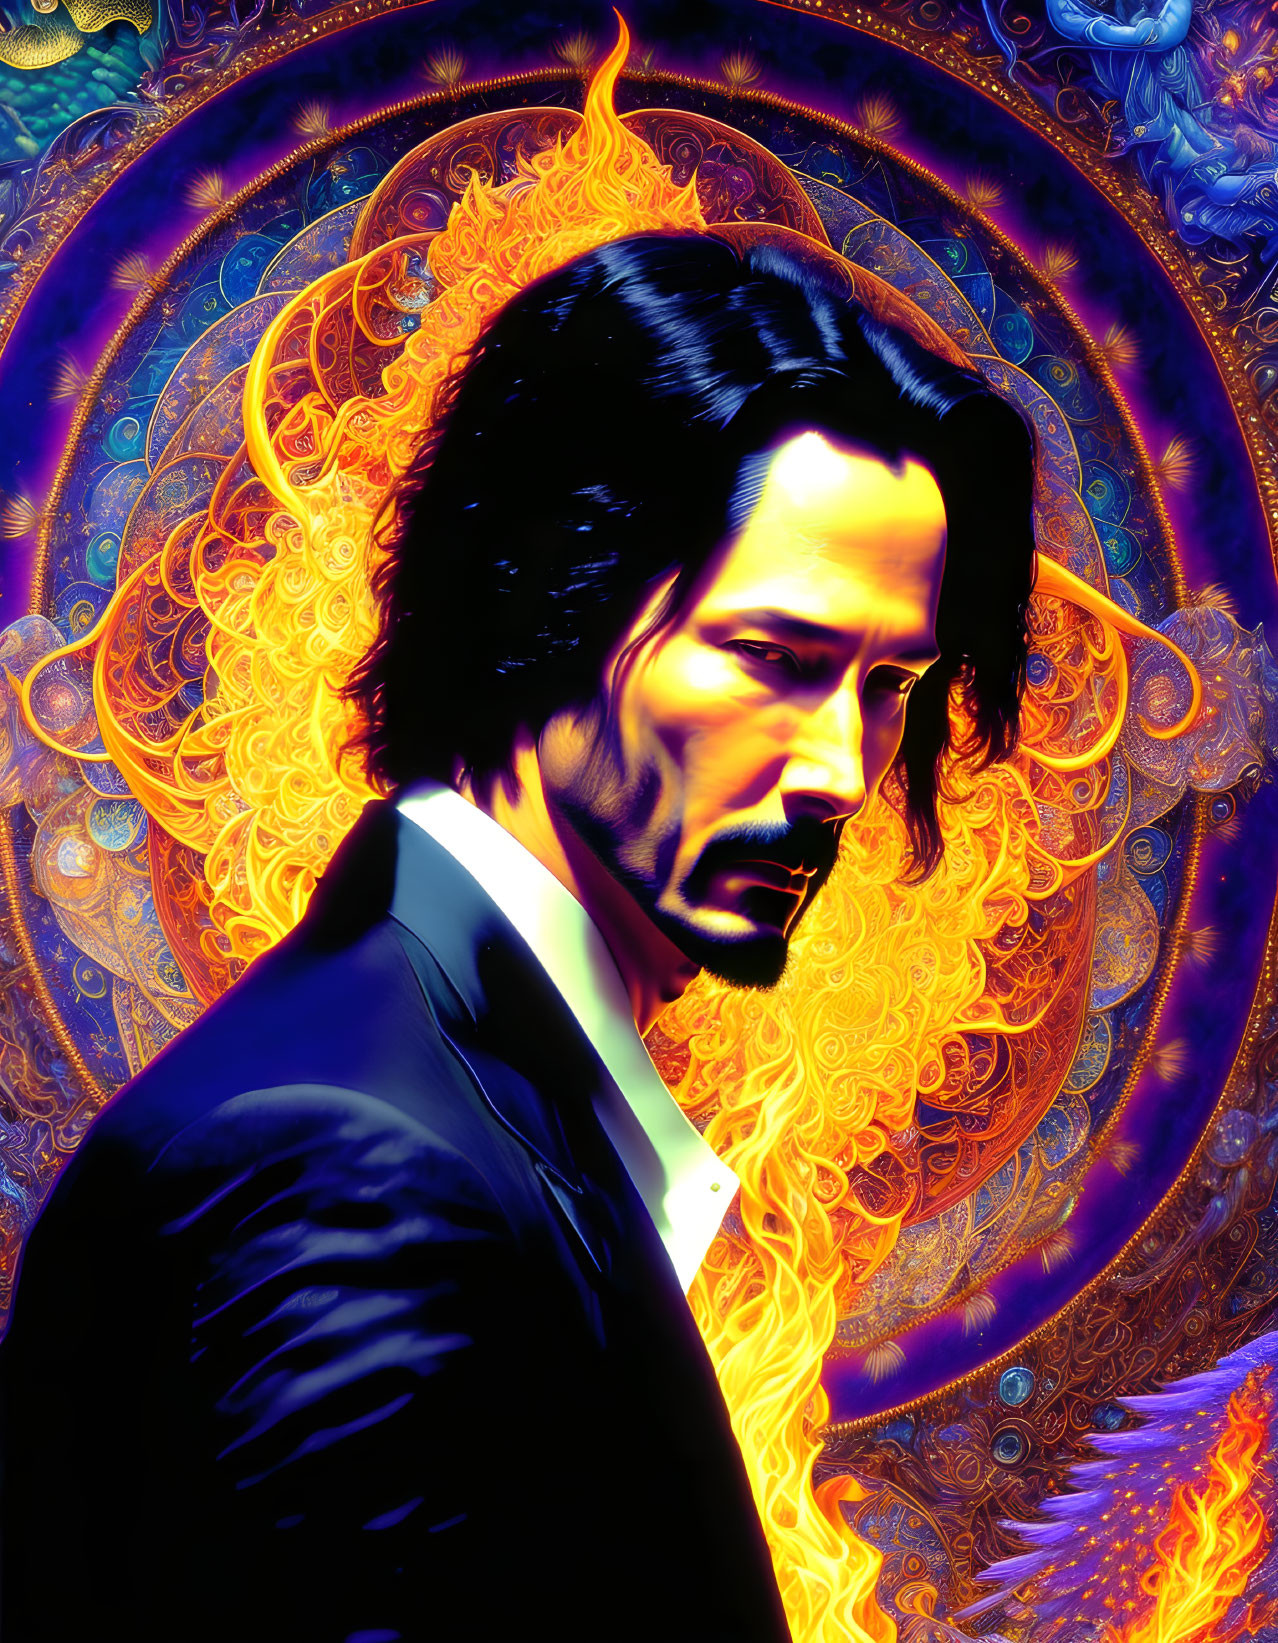 Colorful portrait of man in suit with long hair and beard on cosmic fiery backdrop